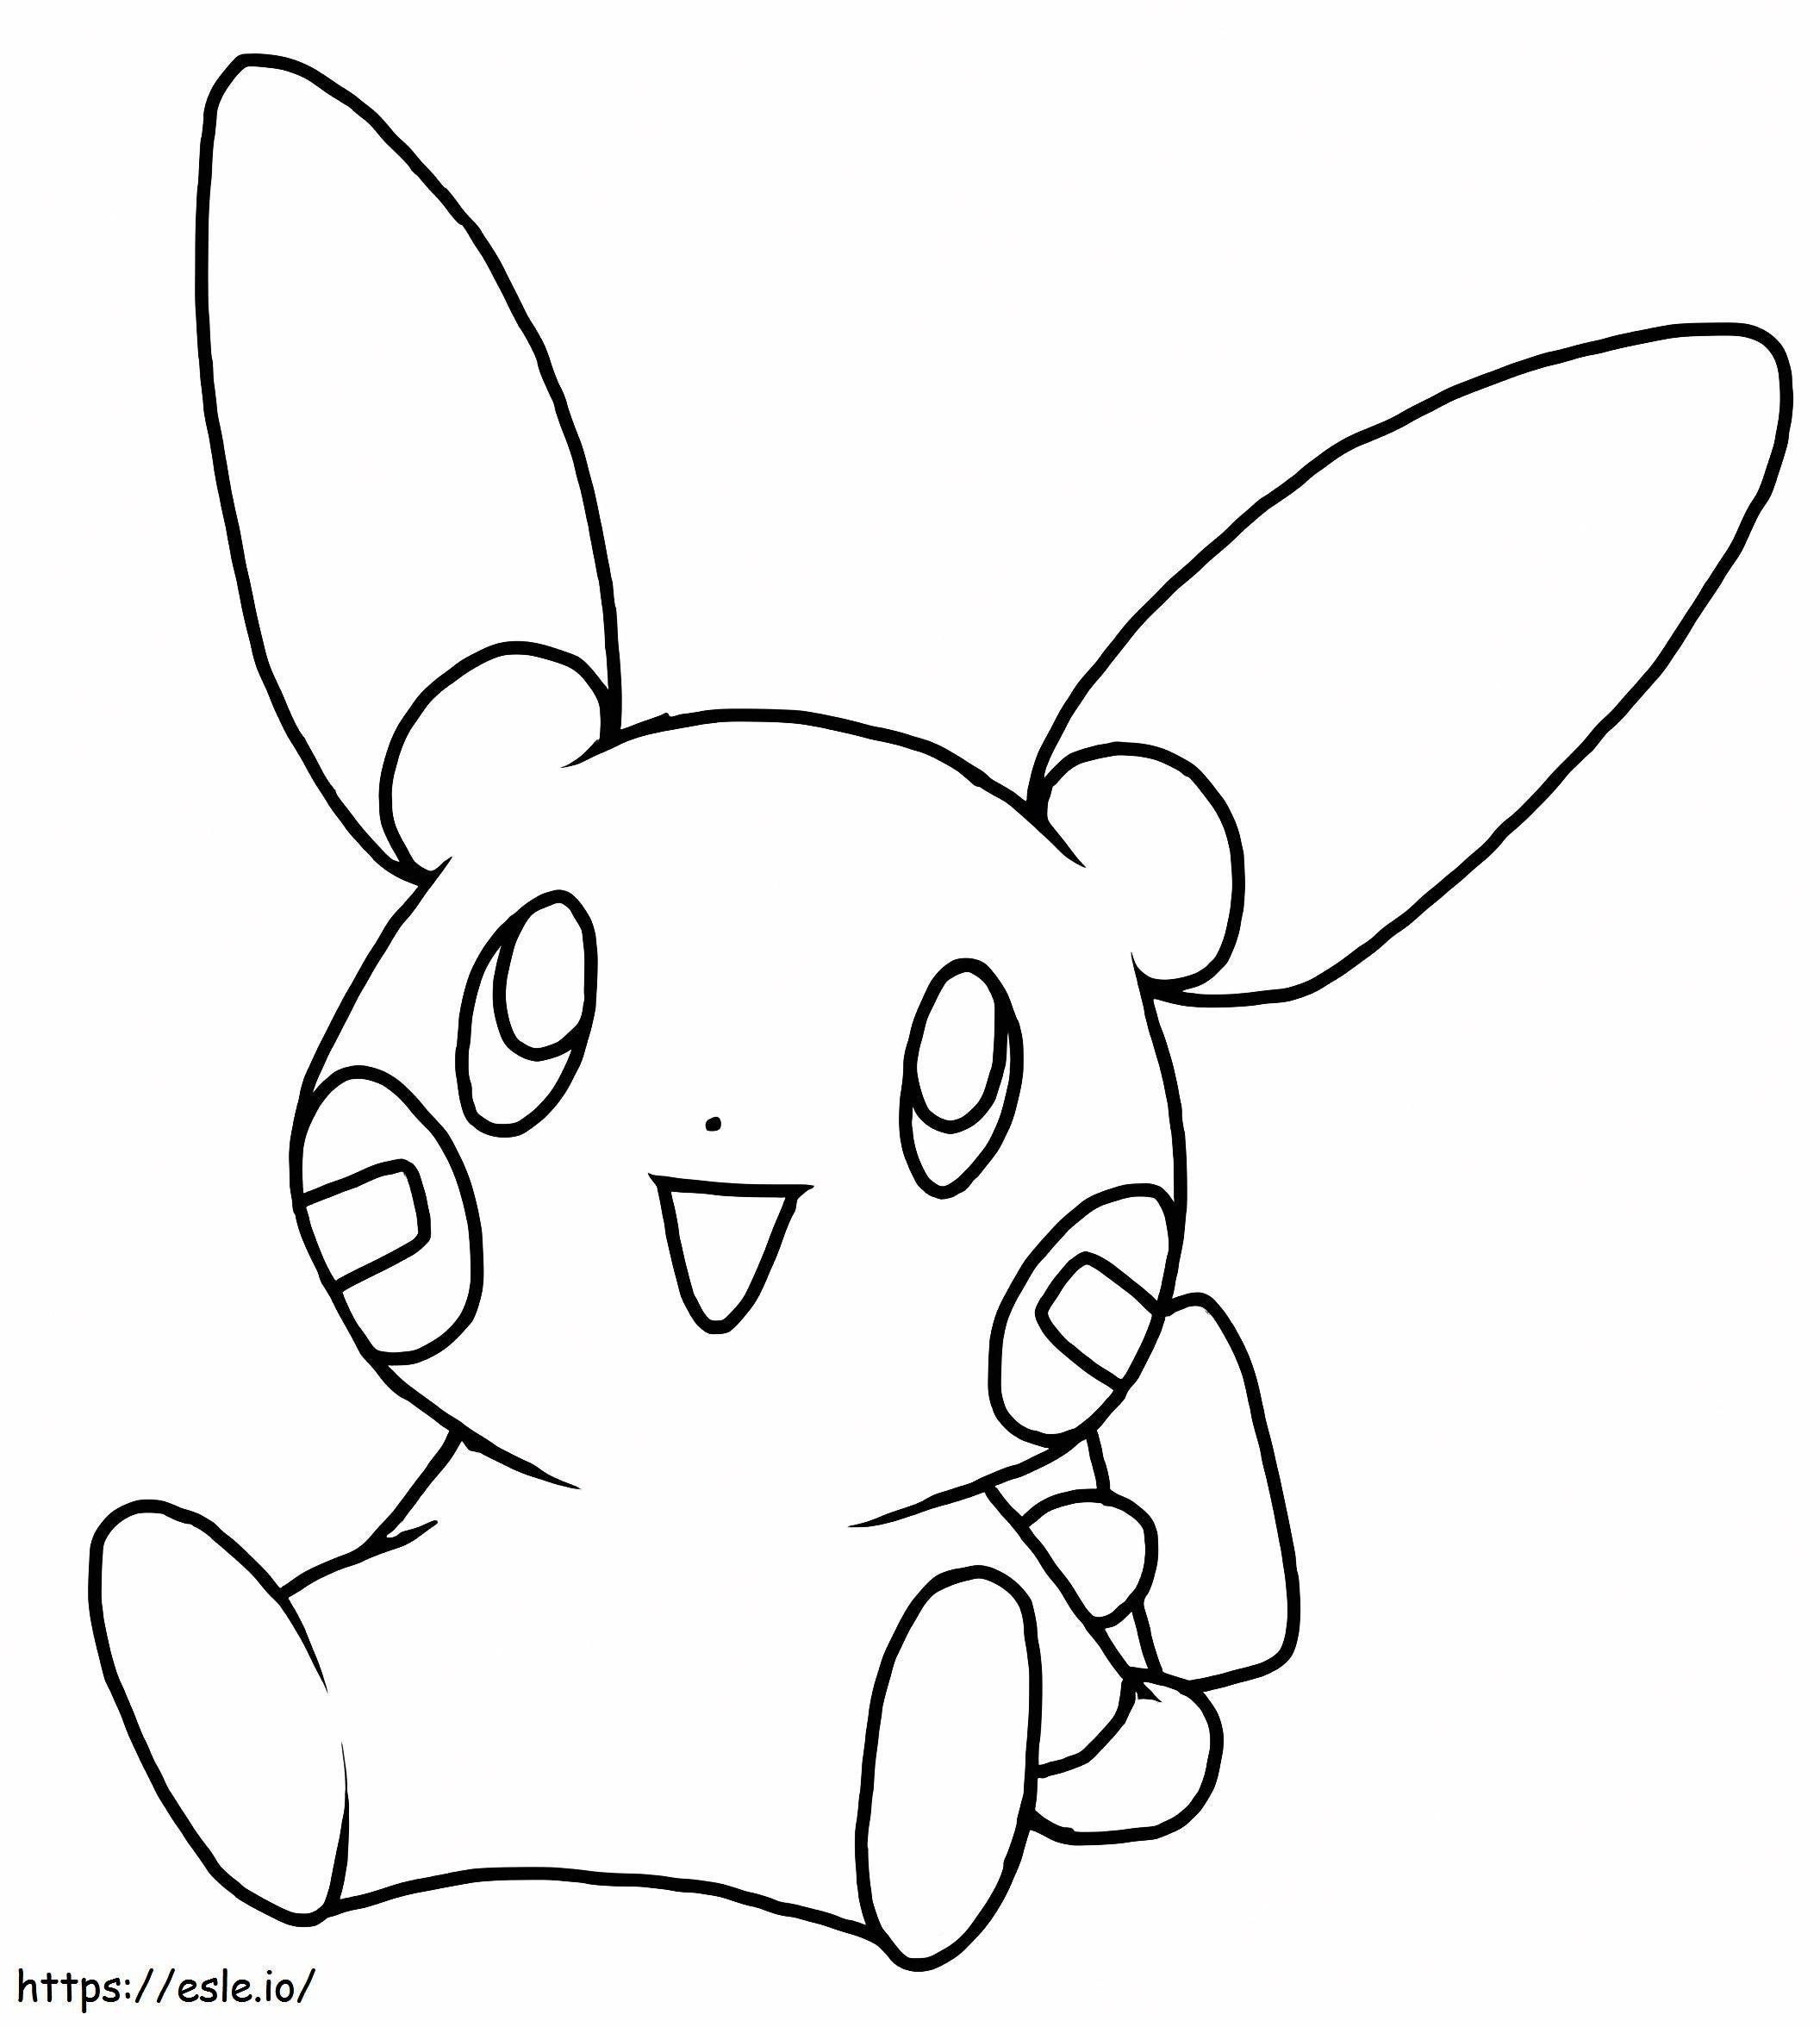 My Pokemon 1 coloring page